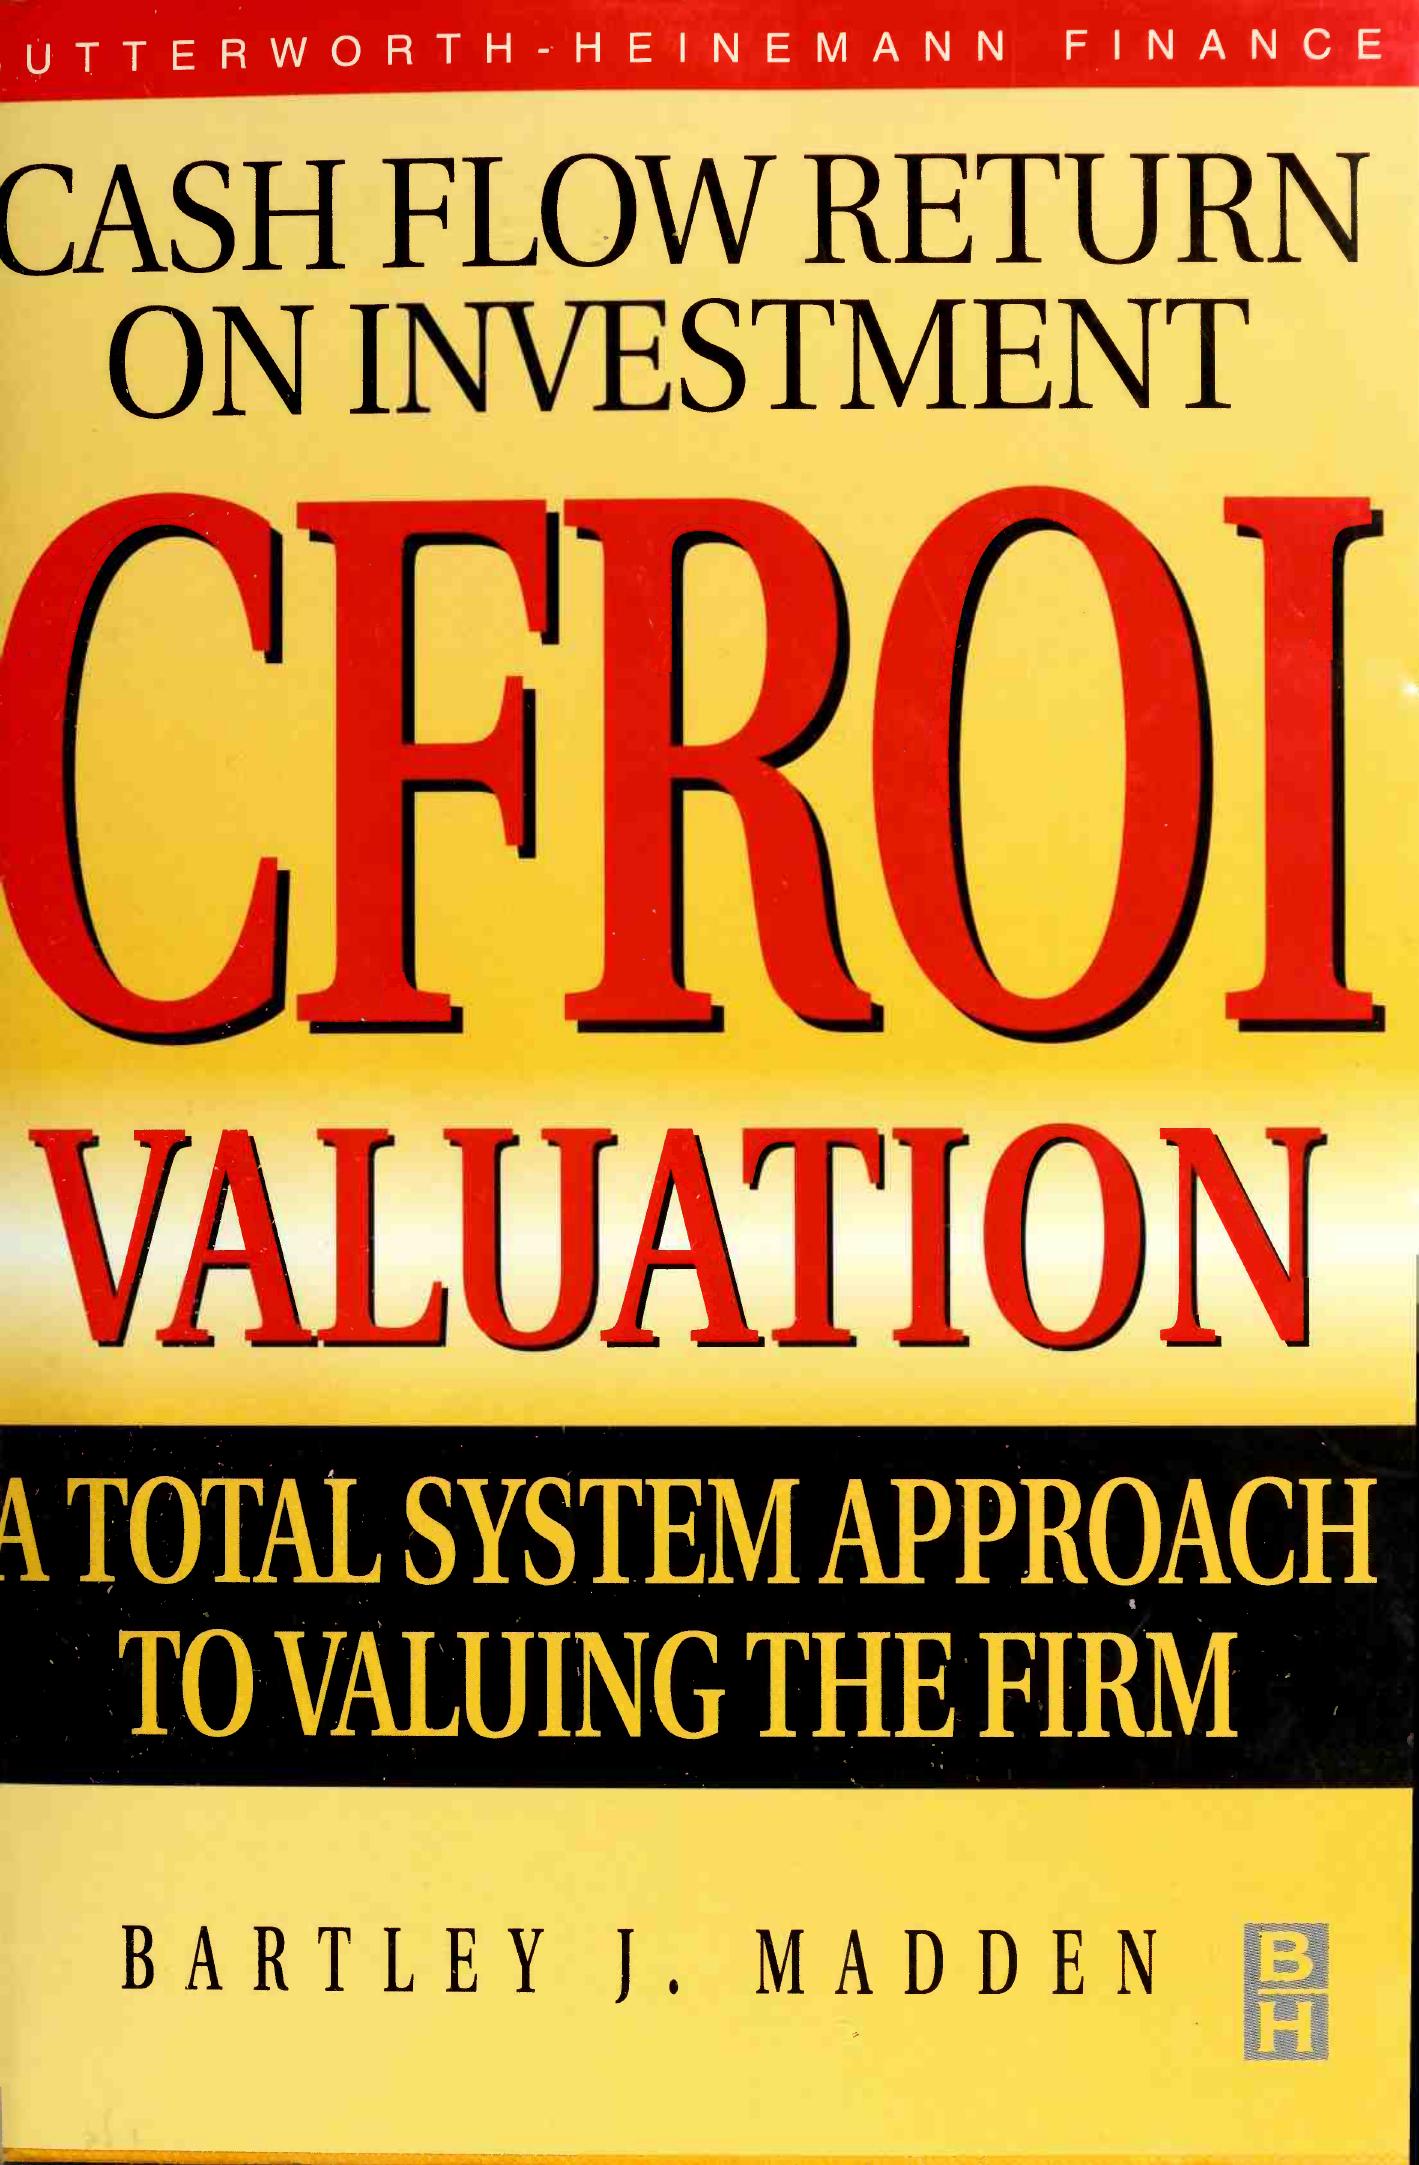 CFROI valuation by Bartley J. Madden